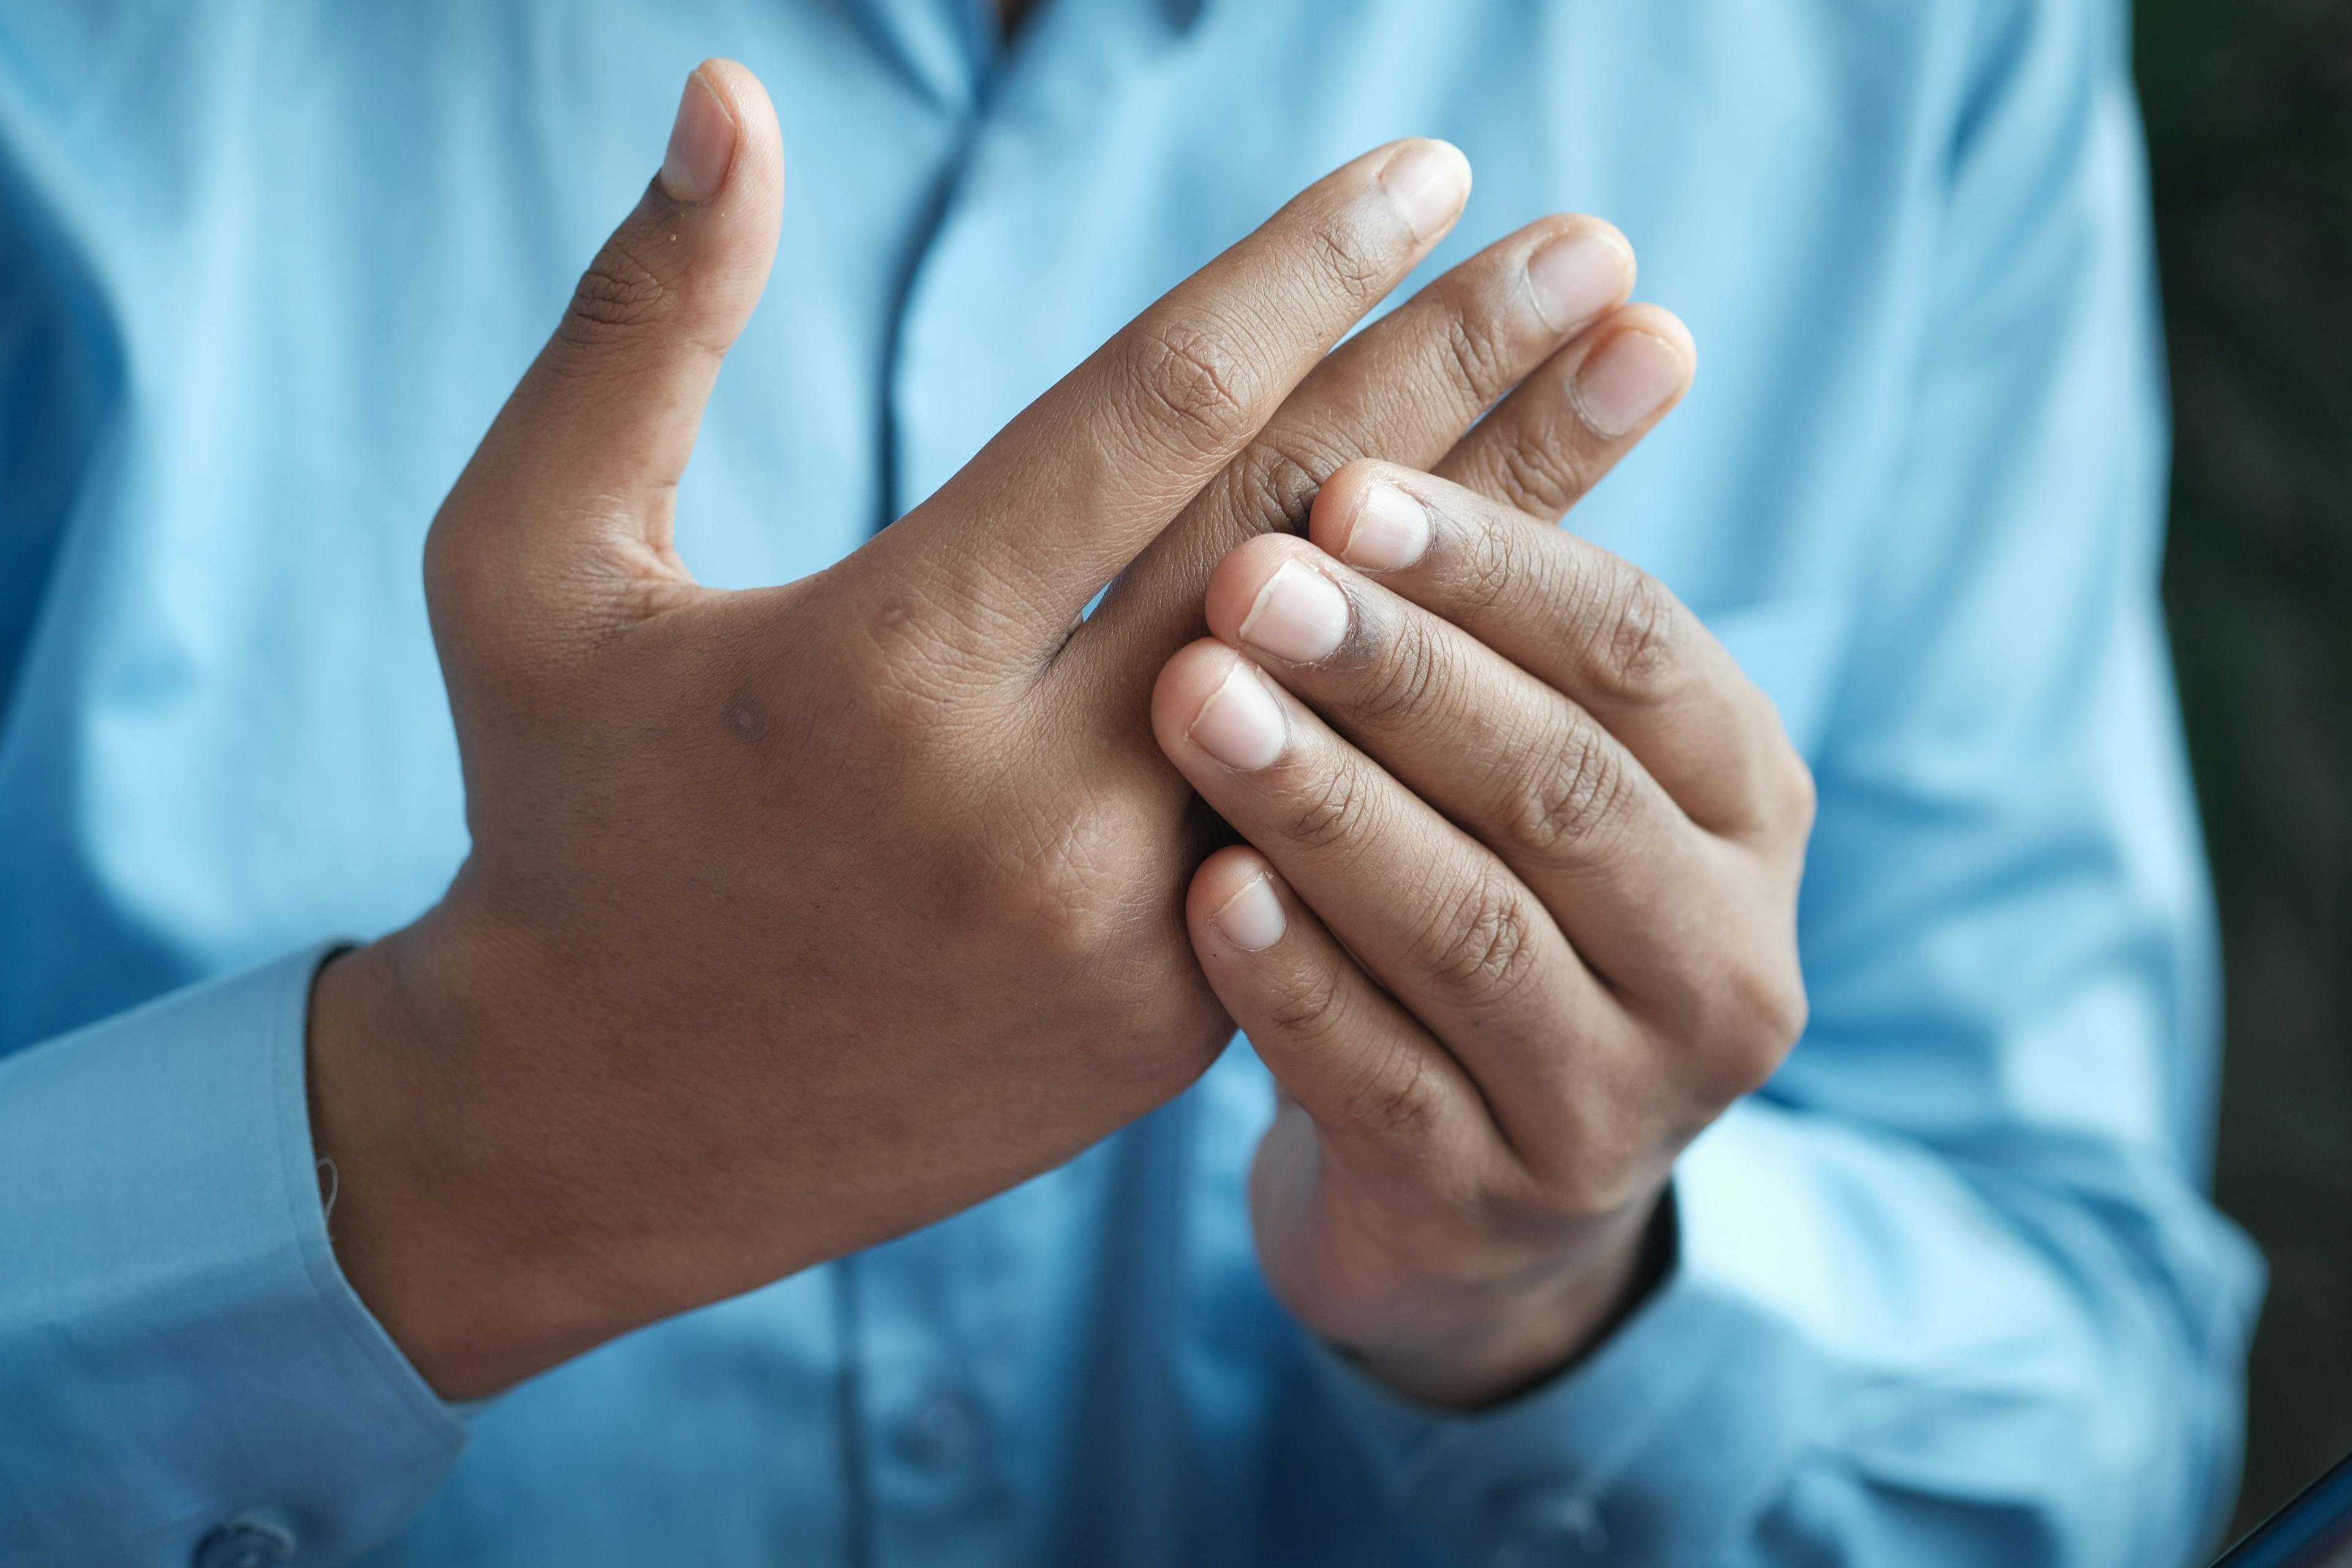 A male patient with gout and joint pain massaging his hand. | Credit: Unsplash